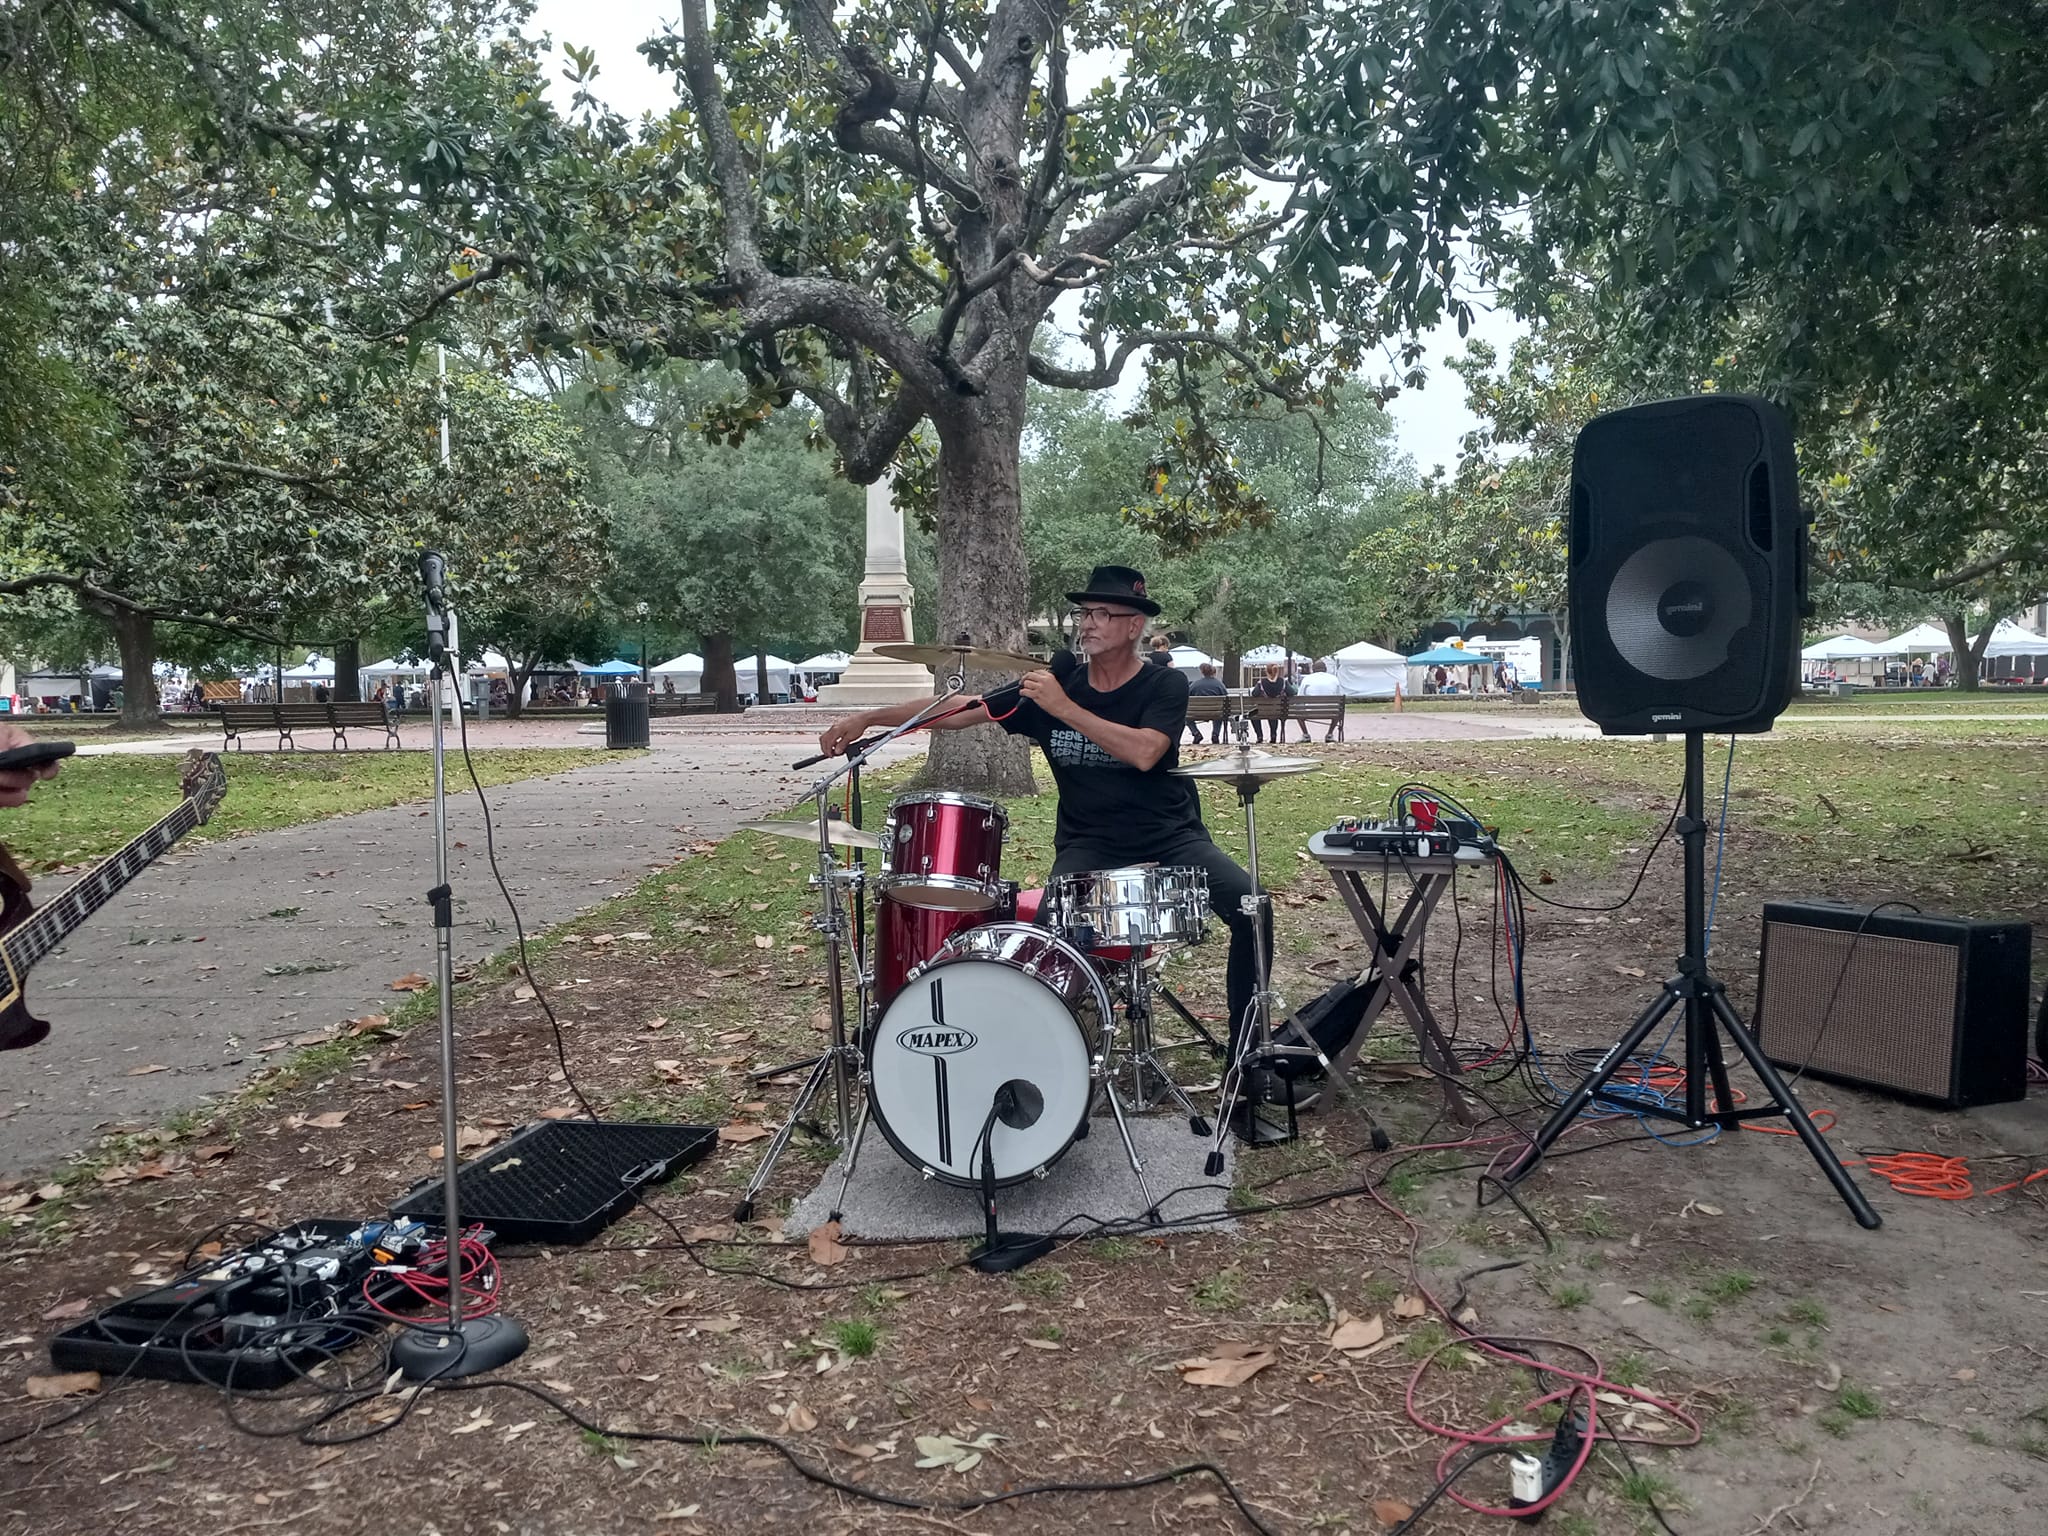 The Beatman setting up downtown for his "Busker project" in progress